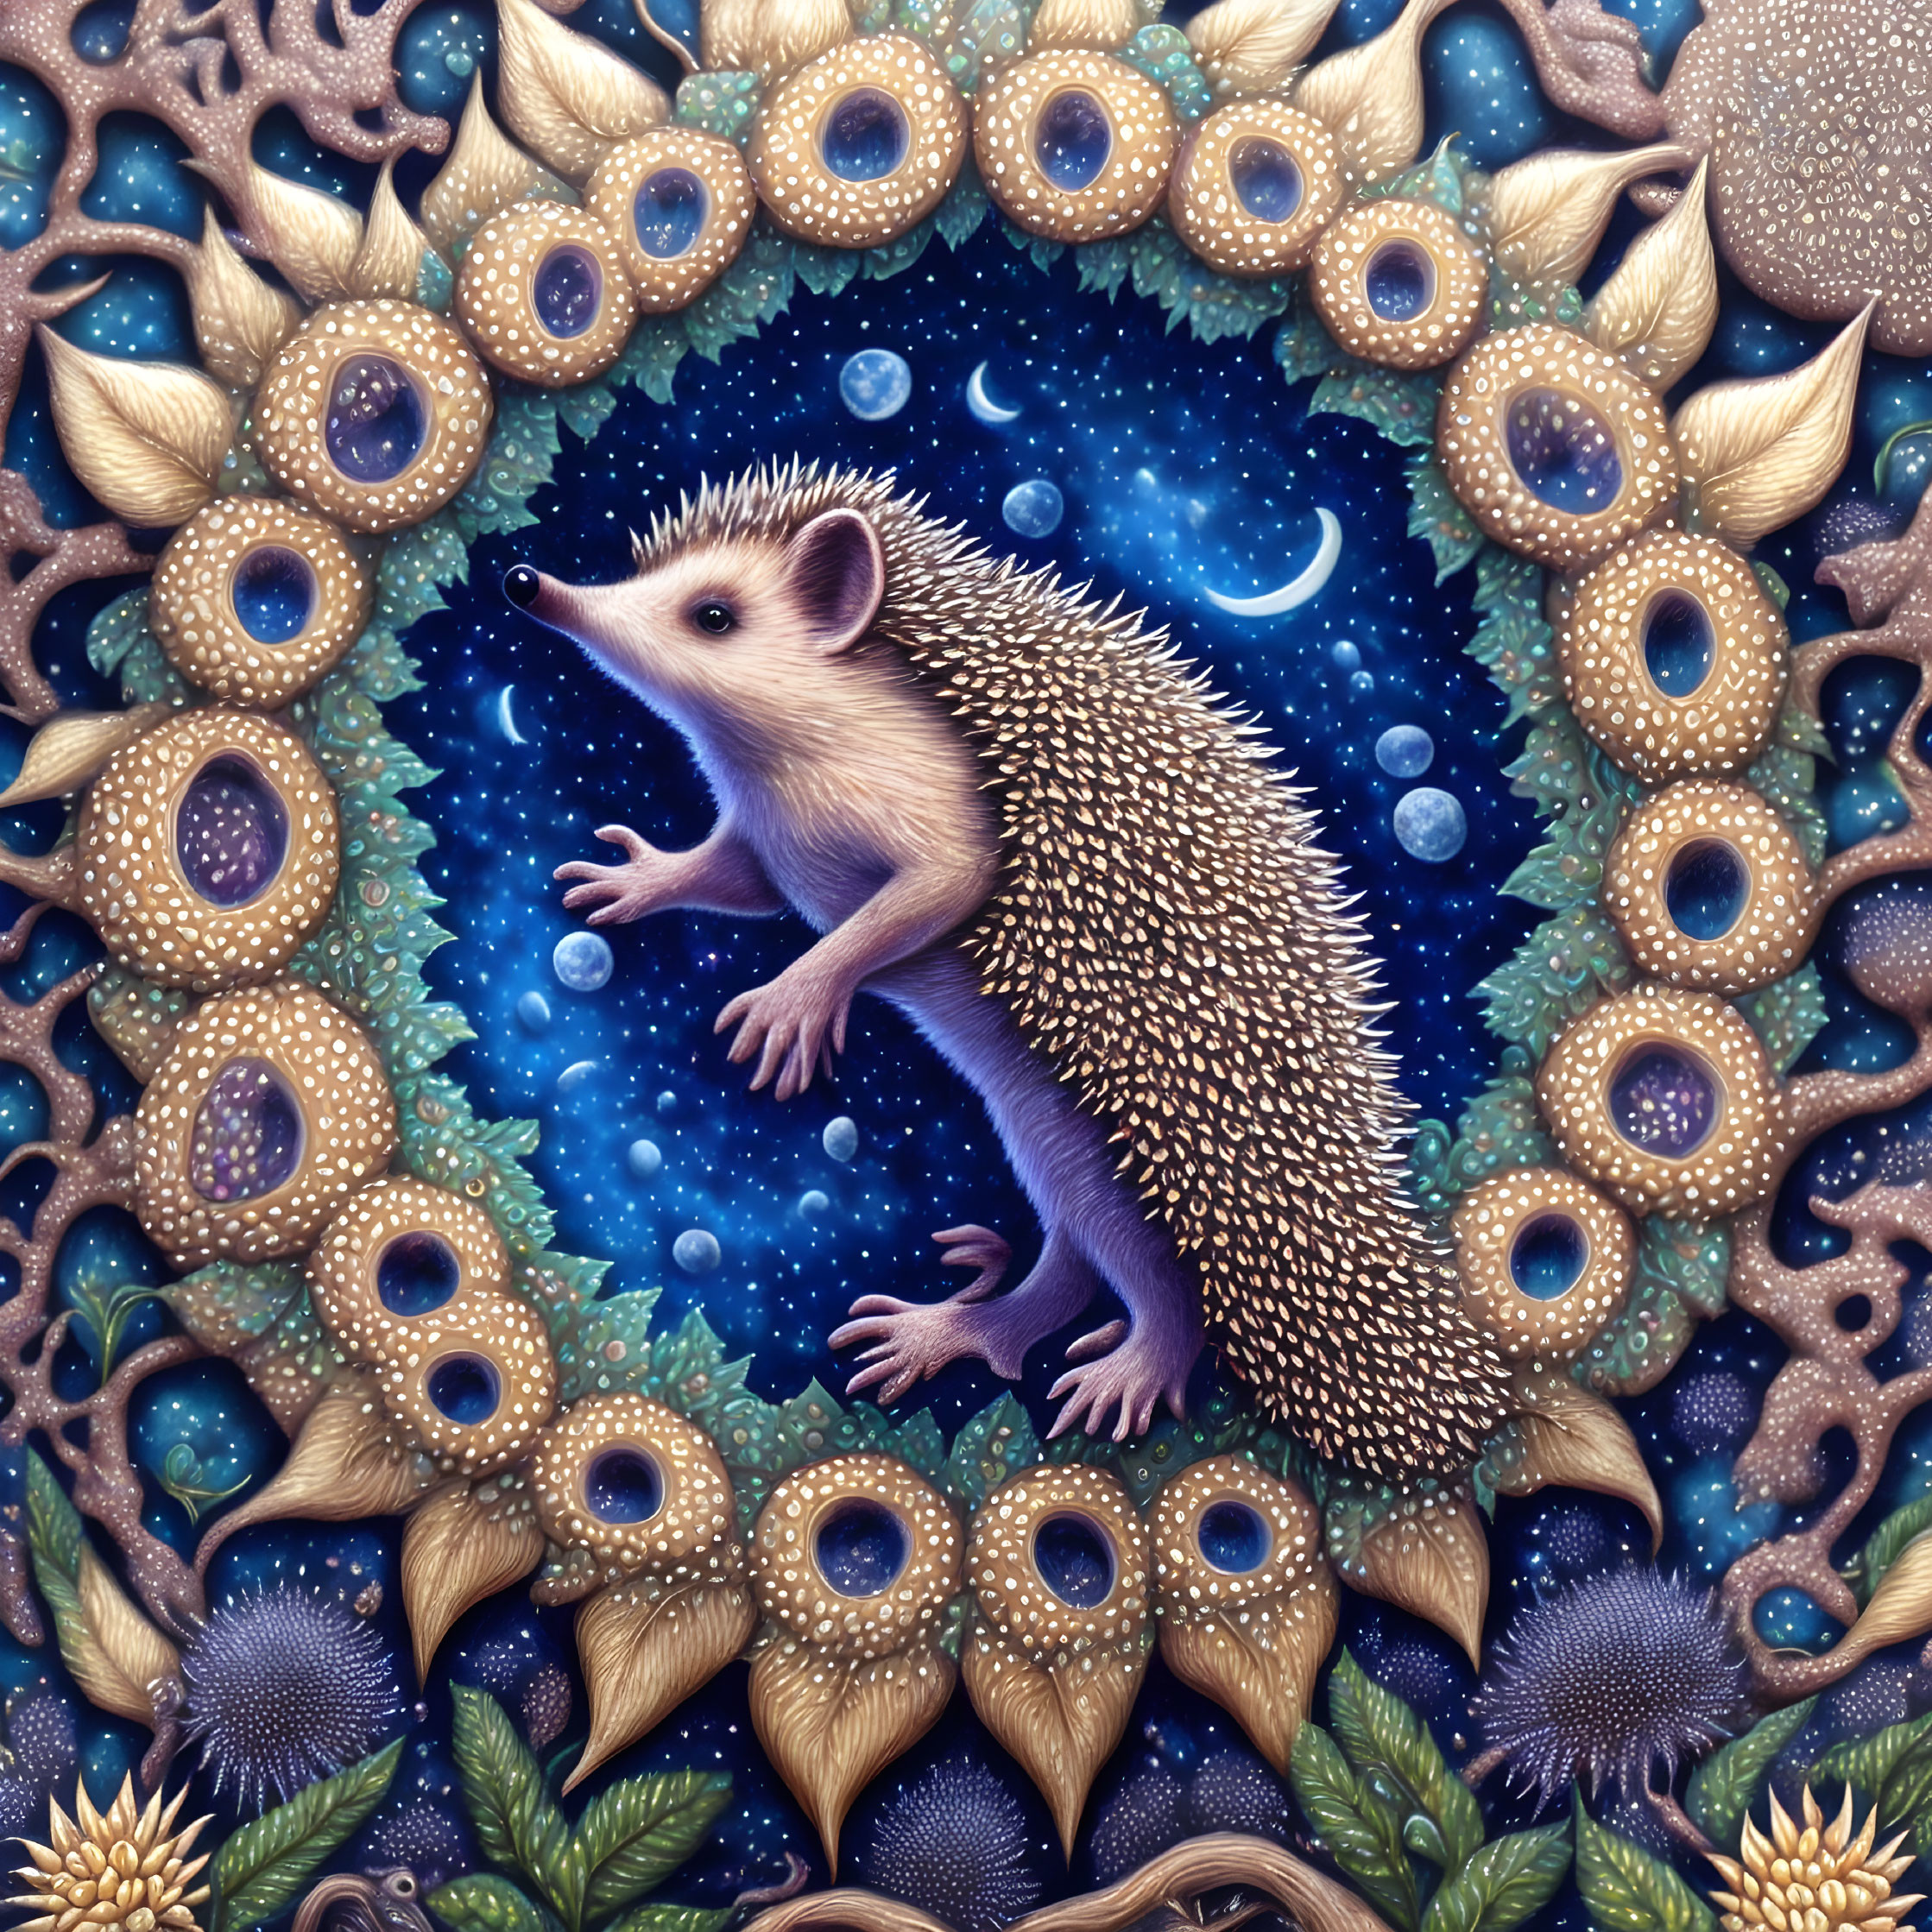 Cosmic hedgehog surrounded by sunflowers and celestial motifs